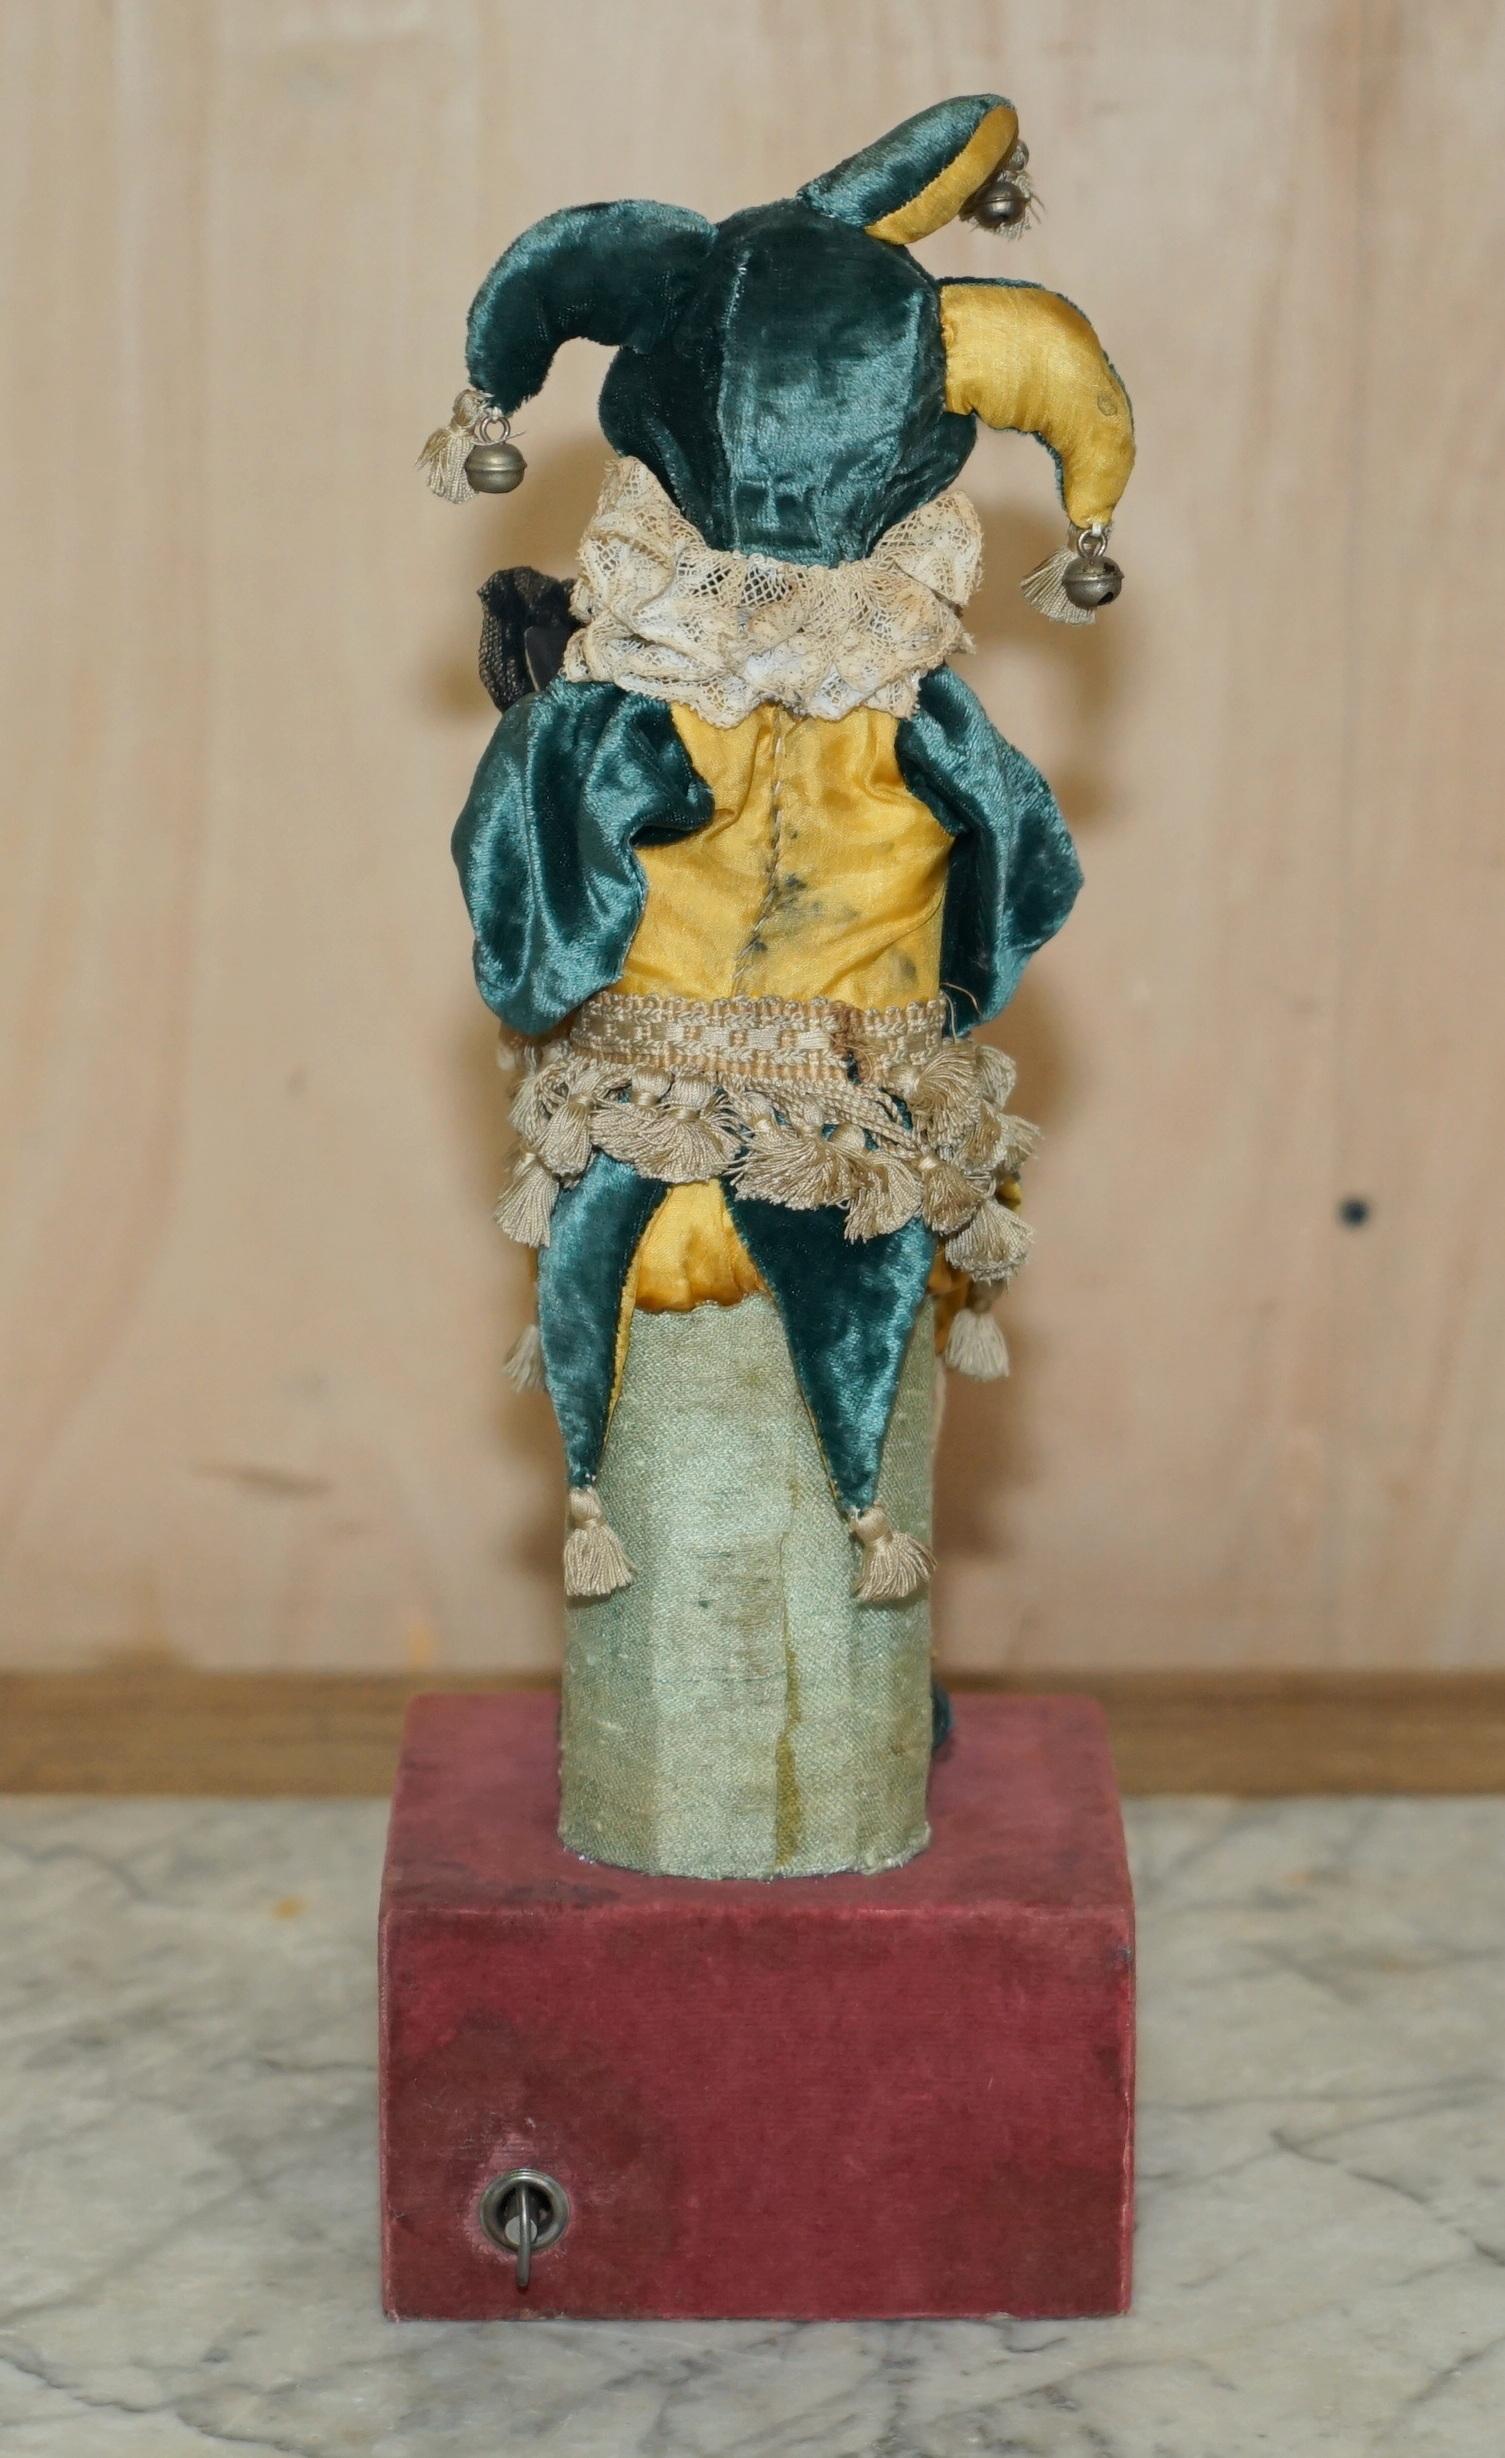 ANTiQUE FRENCH HAND MADE MUSICAL AUTOMATON JESTER CLOWN THAT PLAYS MUSIC & MOVES For Sale 4